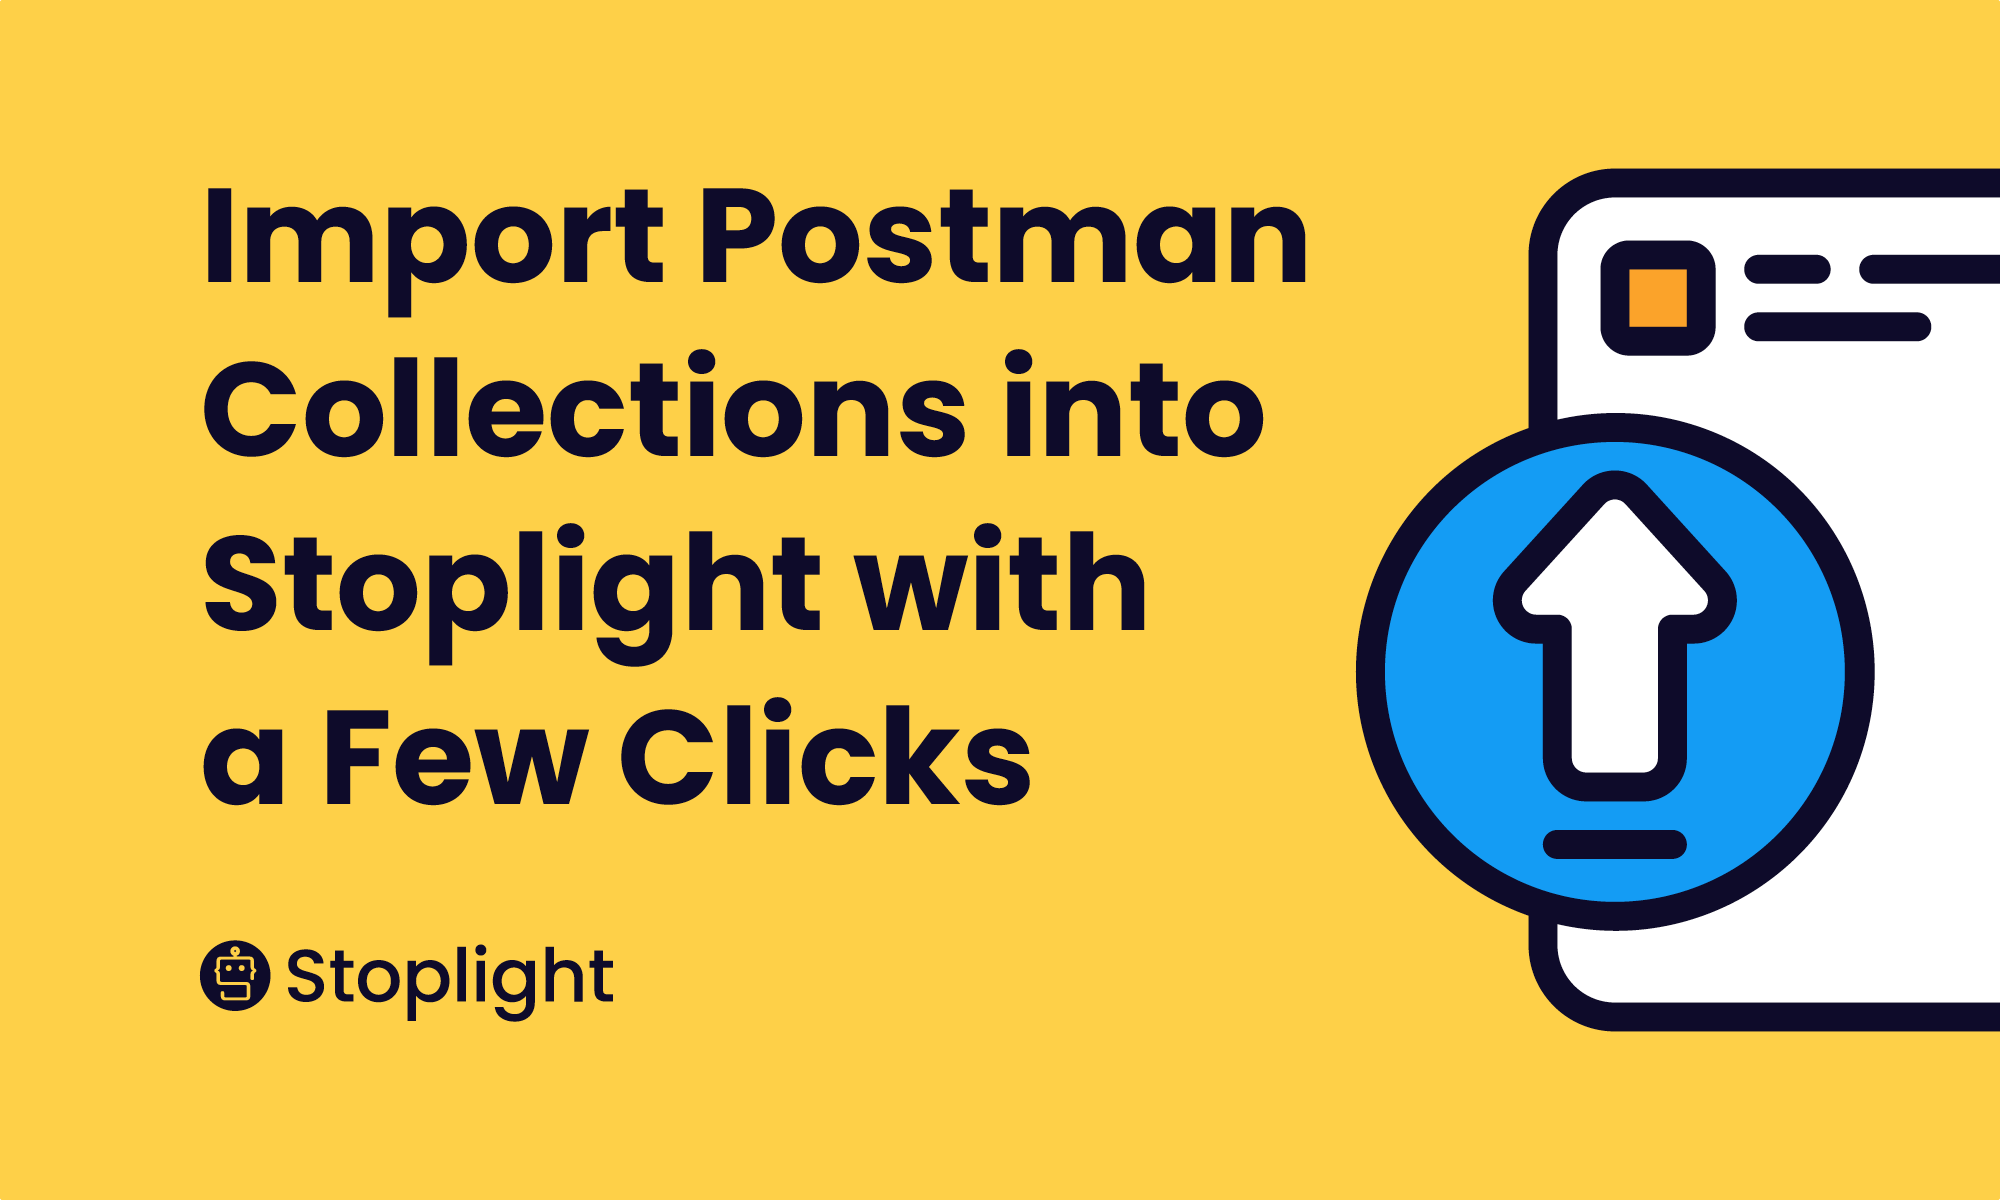 Import Postman Collections into Stoplight with a Few Clicks